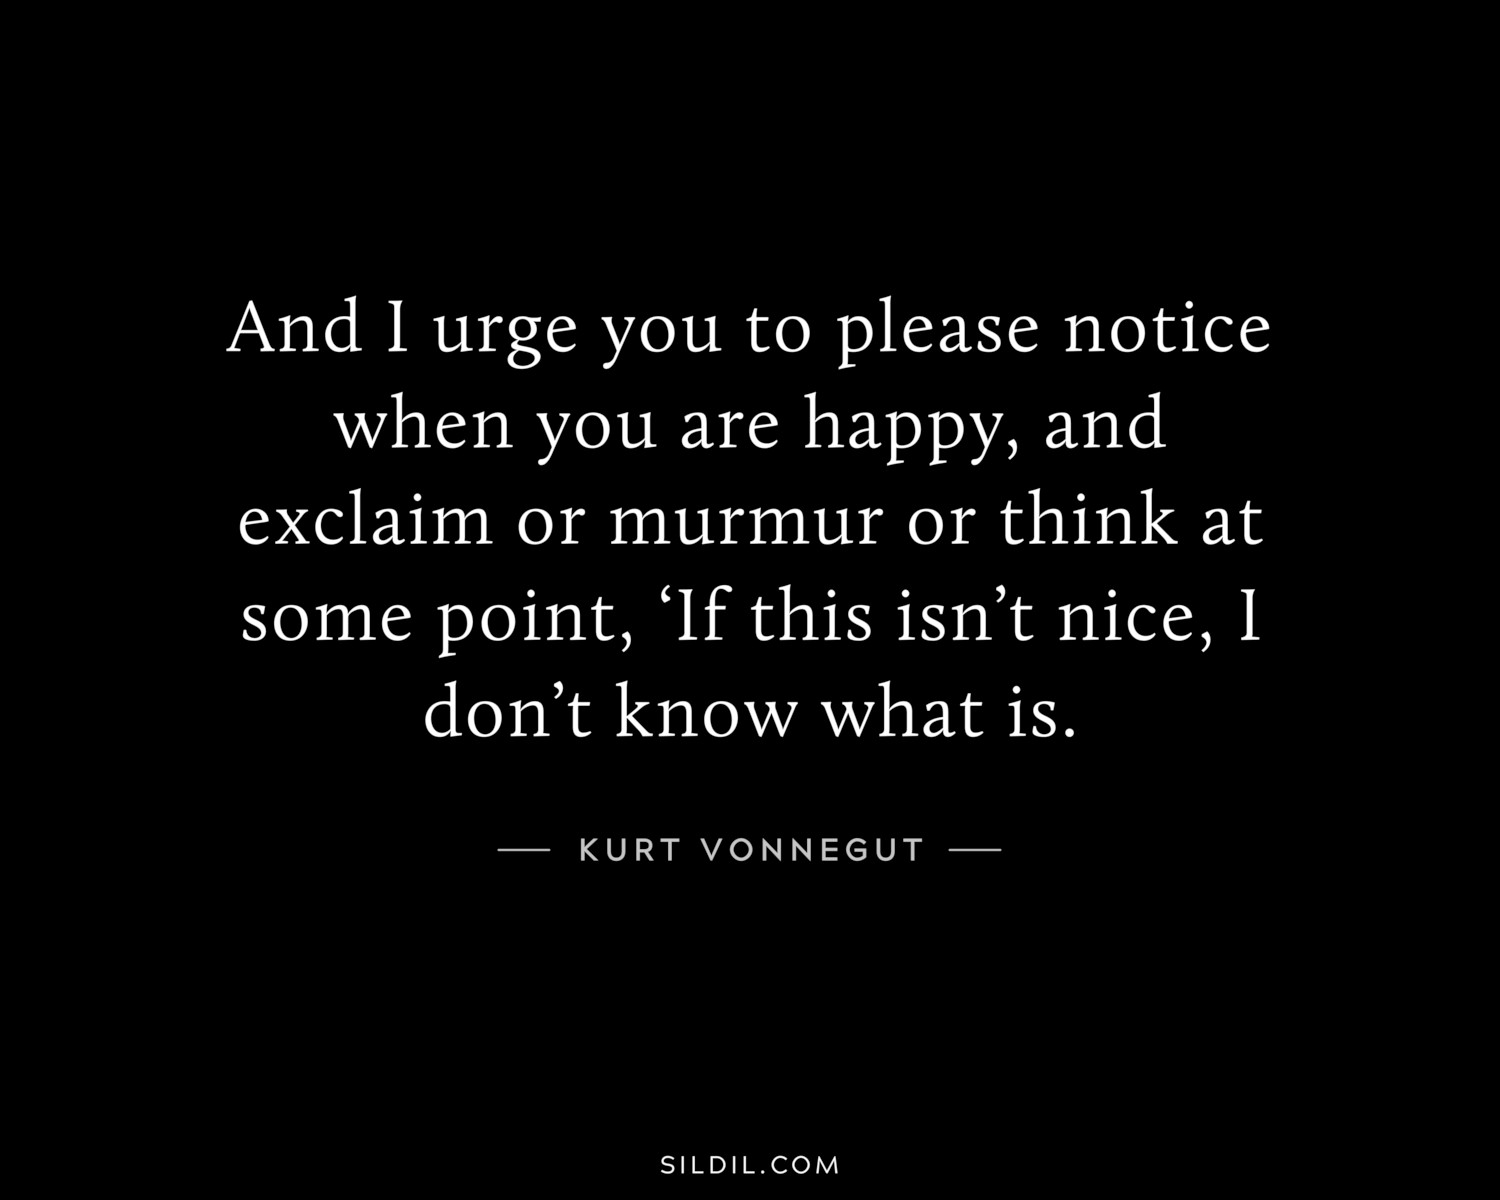 And I urge you to please notice when you are happy, and exclaim or murmur or think at some point, ‘If this isn’t nice, I don’t know what is.